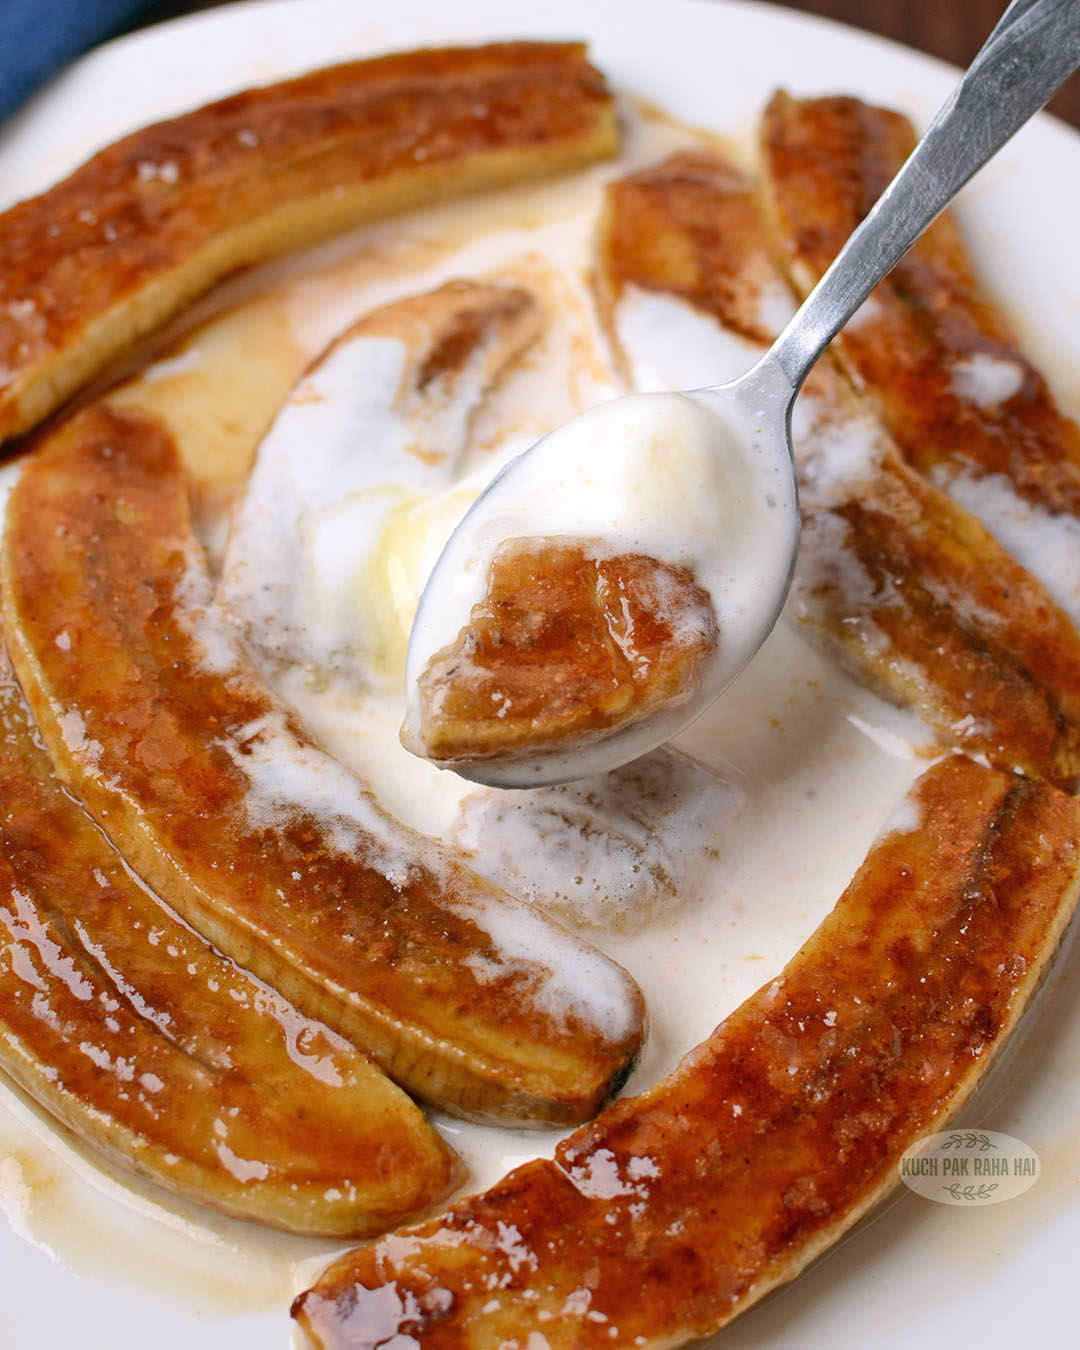 Air fried bananas served with vanilla ice cream.